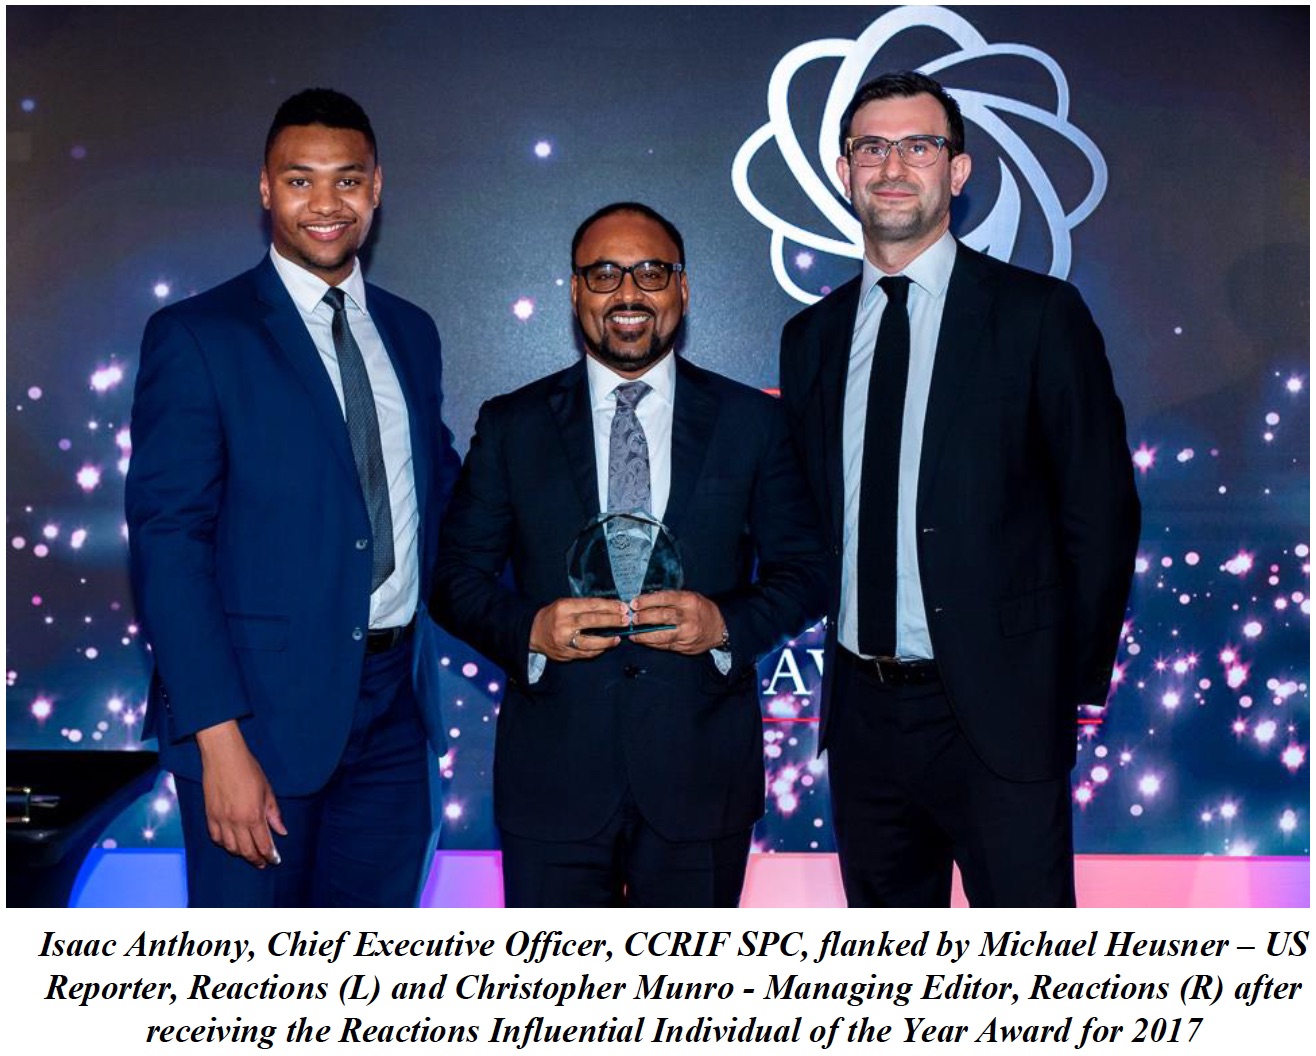 CCRIF CEO Isaac Anthony Receives Reactions Influential Individual of the Year Award 2017